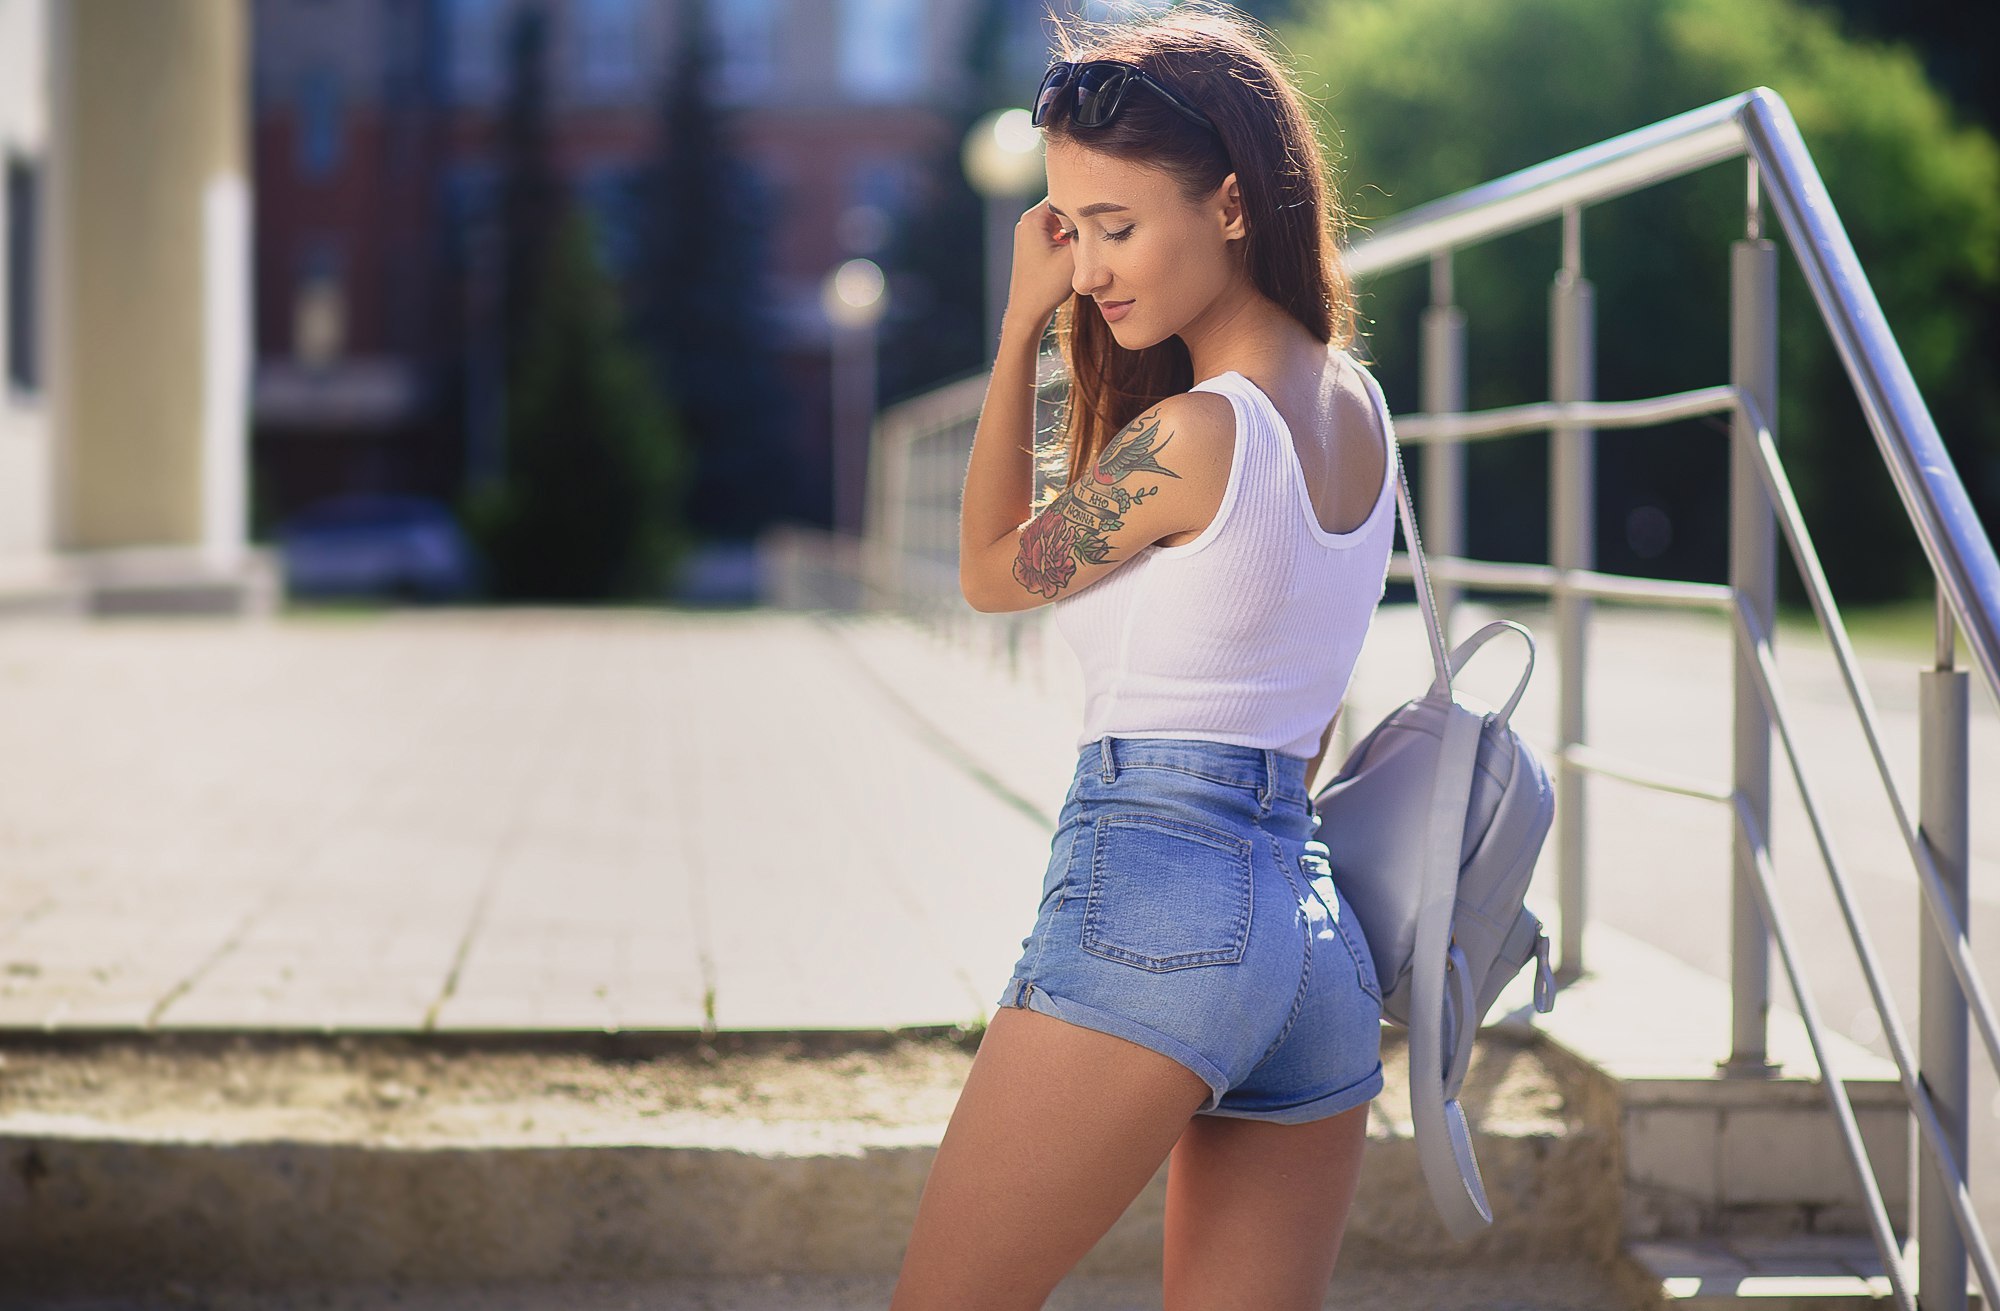 People 2000x1311 women tanned jean shorts tattoo handbags T-shirt depth of field women outdoors petite high waisted shorts white tops inked girls model women with shades sunglasses urban standing